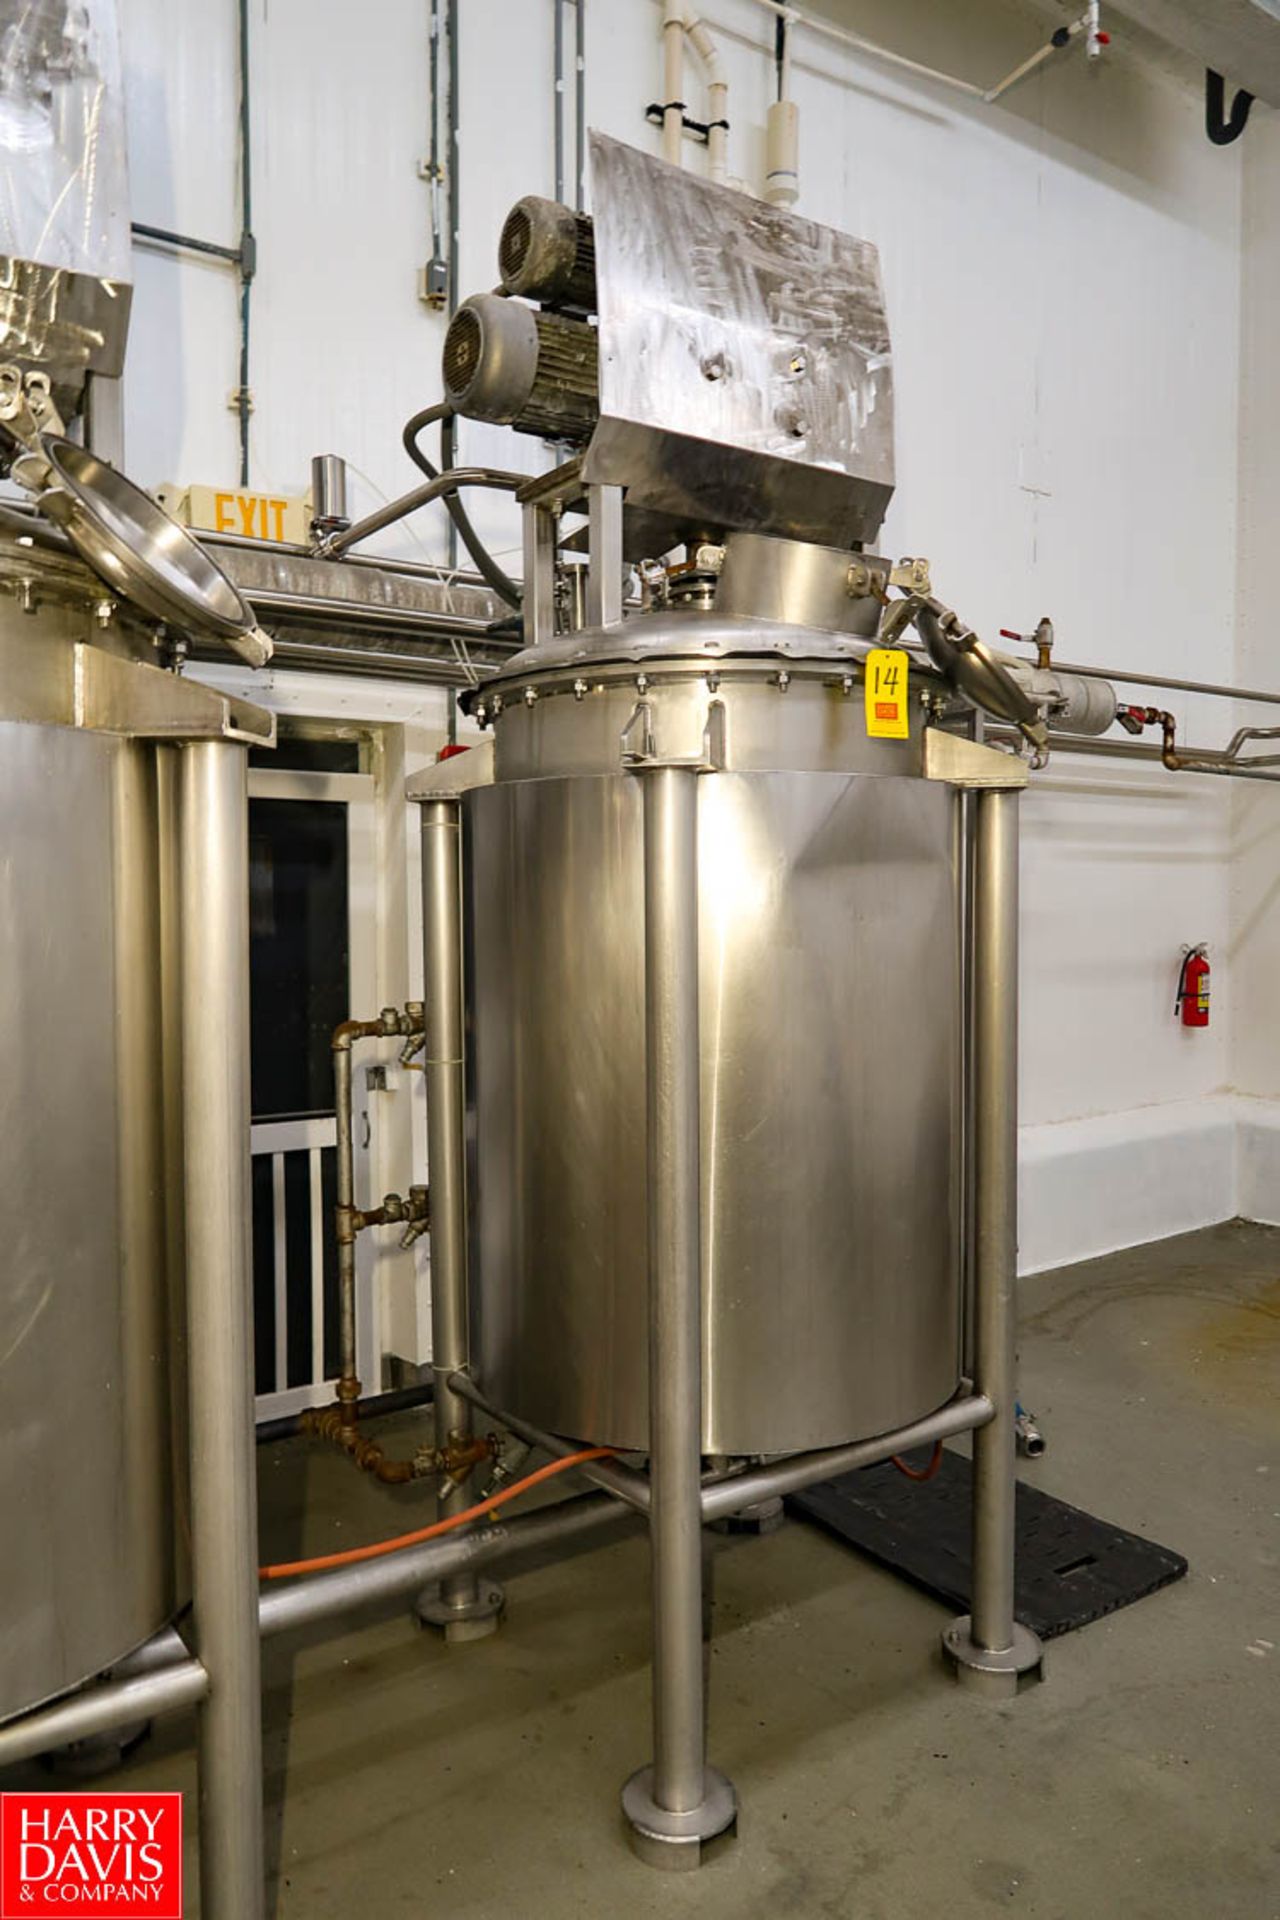 200 Gallon S/S Jacketed Cook Tank with Vertical Double Motion Agitation; 100 PSI Jacket. Rigging